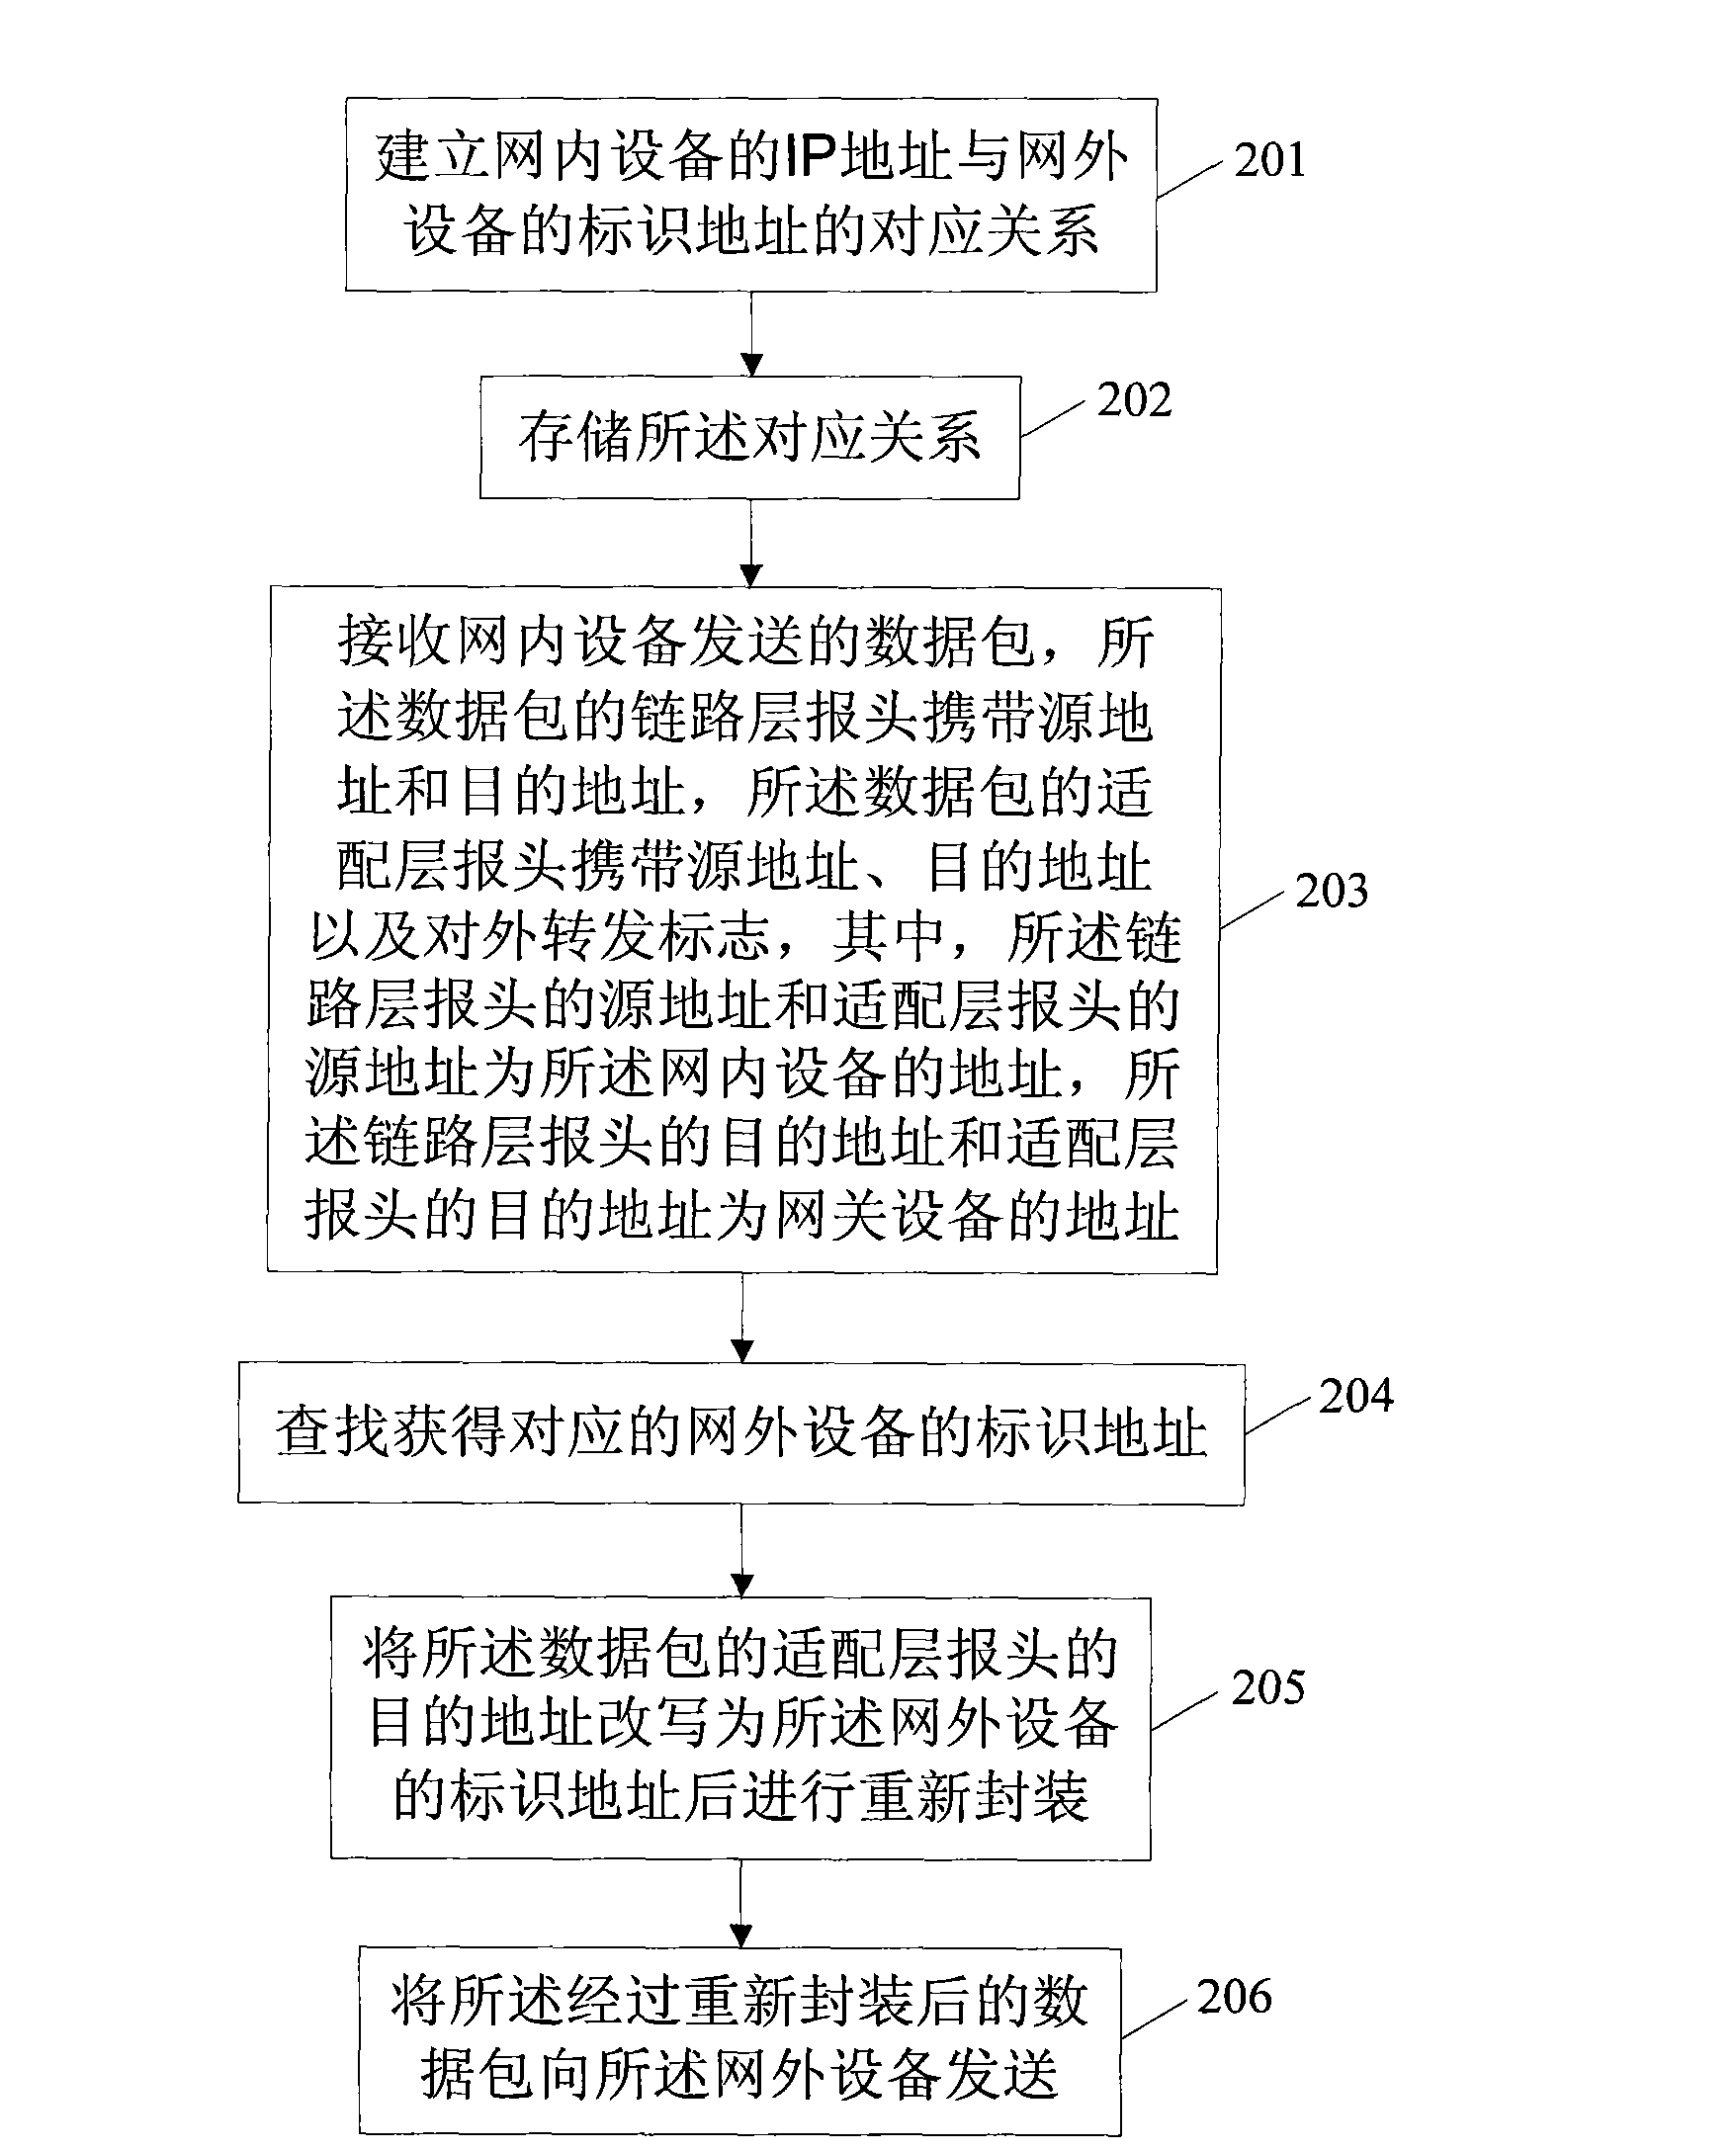 Method, device and system of external communication of 6LoWPAN (internet protocol 6 over low power wireless personal area network) intra-network device and outside